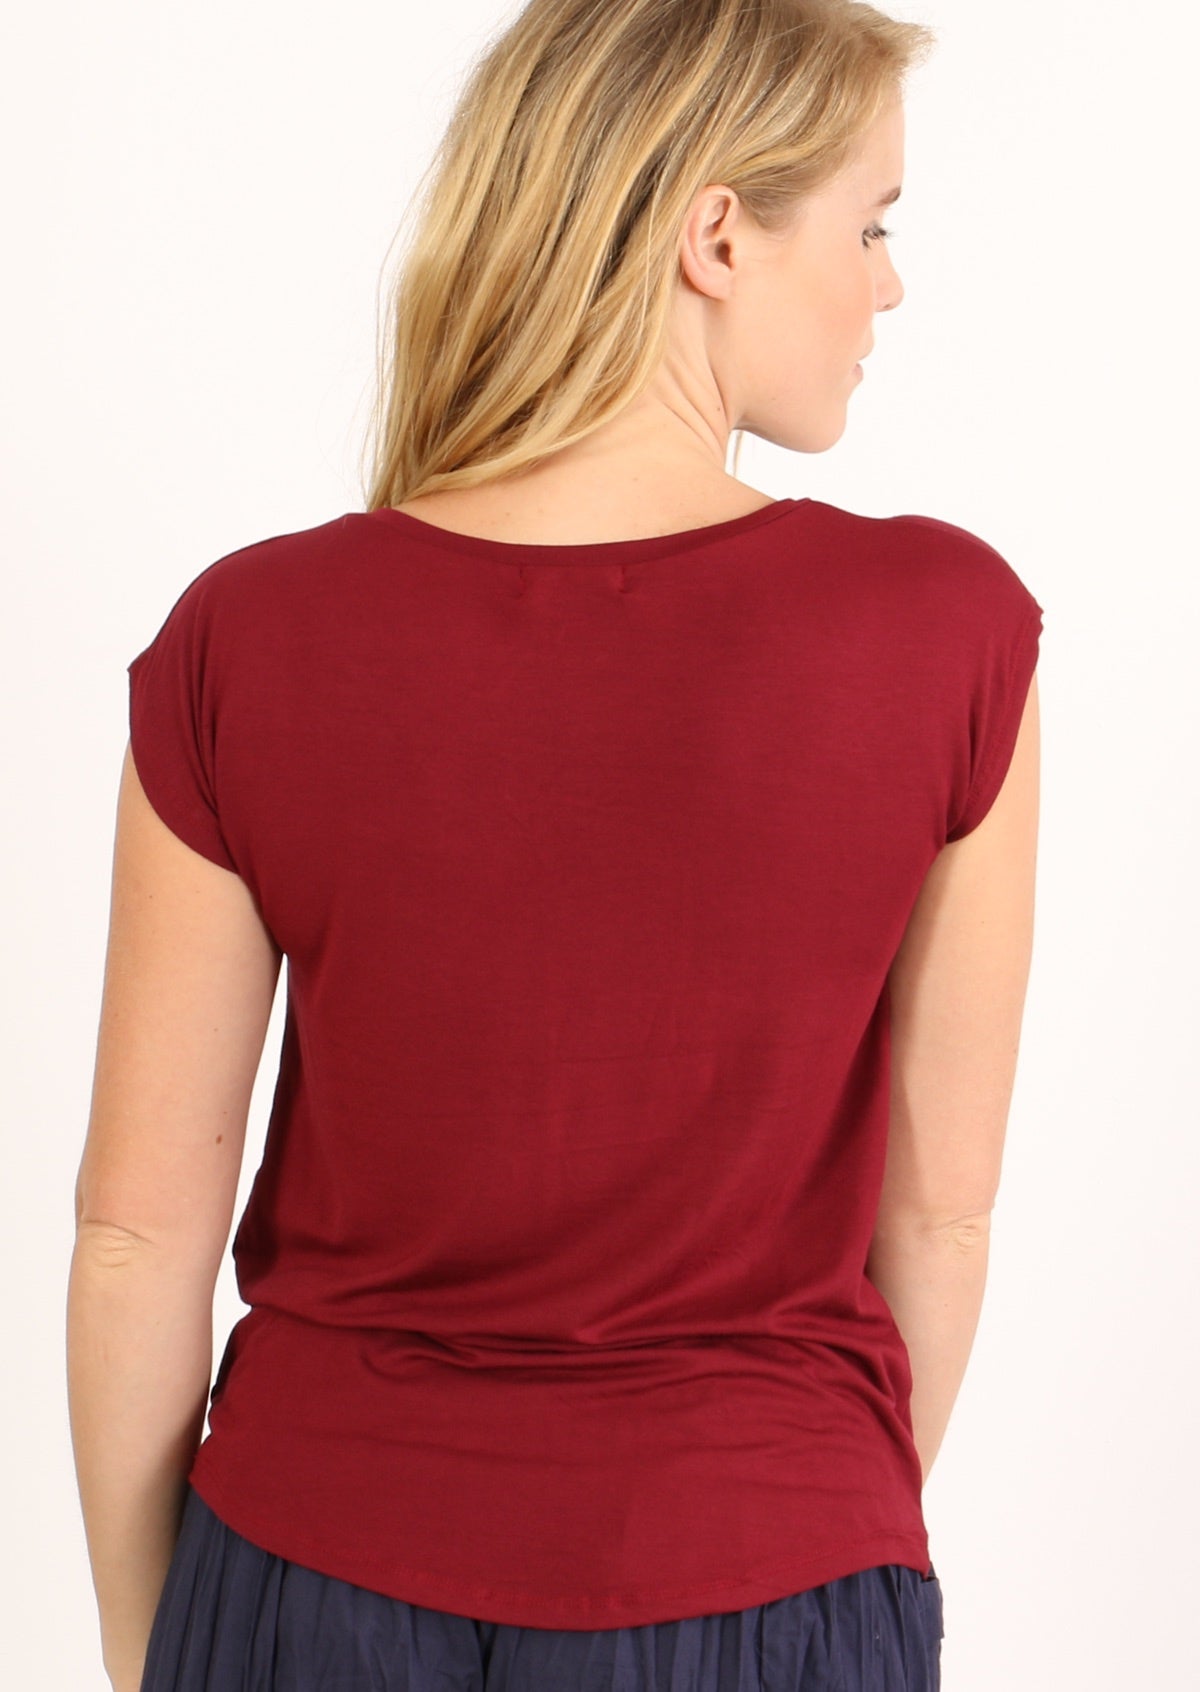 Back view of a woman wearing a maroon v-neck short cap sleeve rayon top